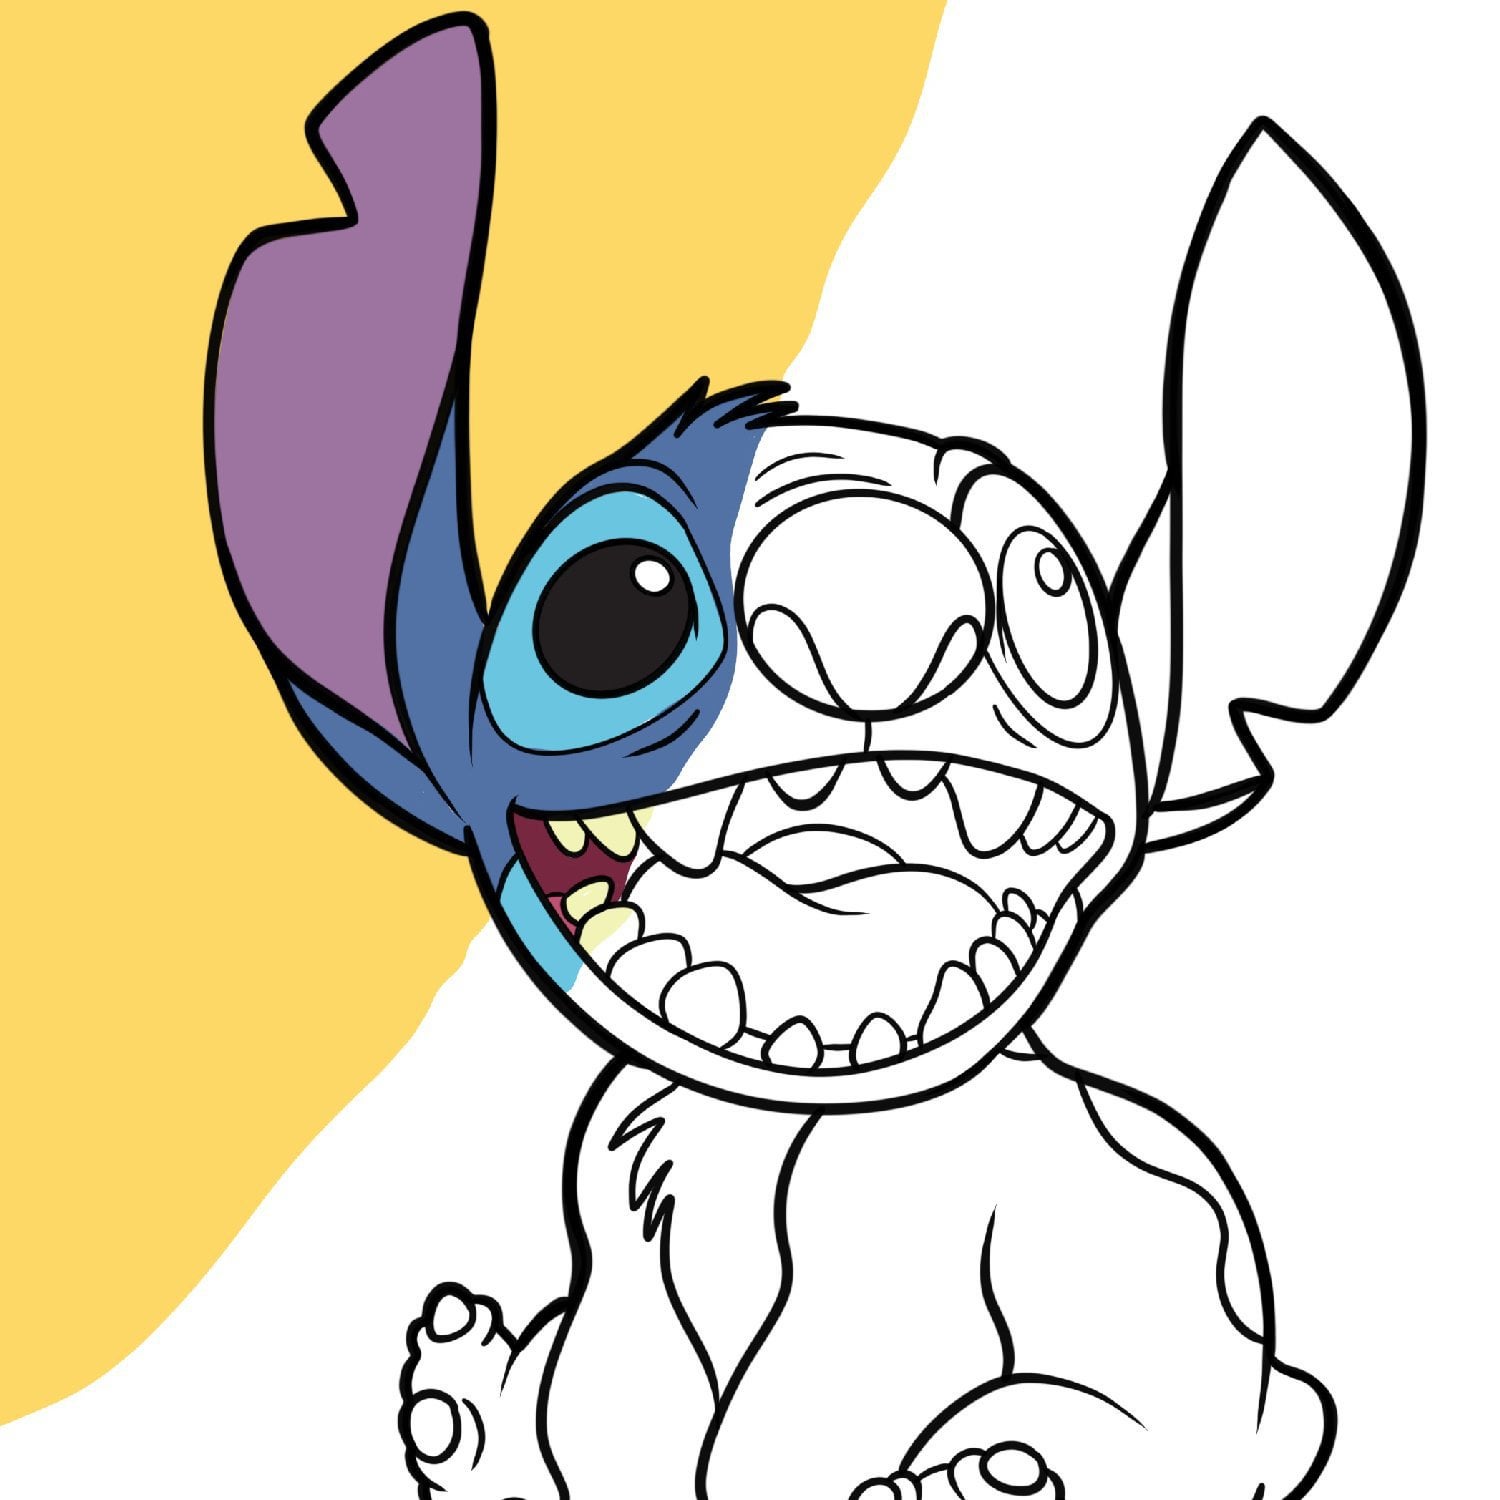 Stitch coloring page free printable rfreecoloringforkids